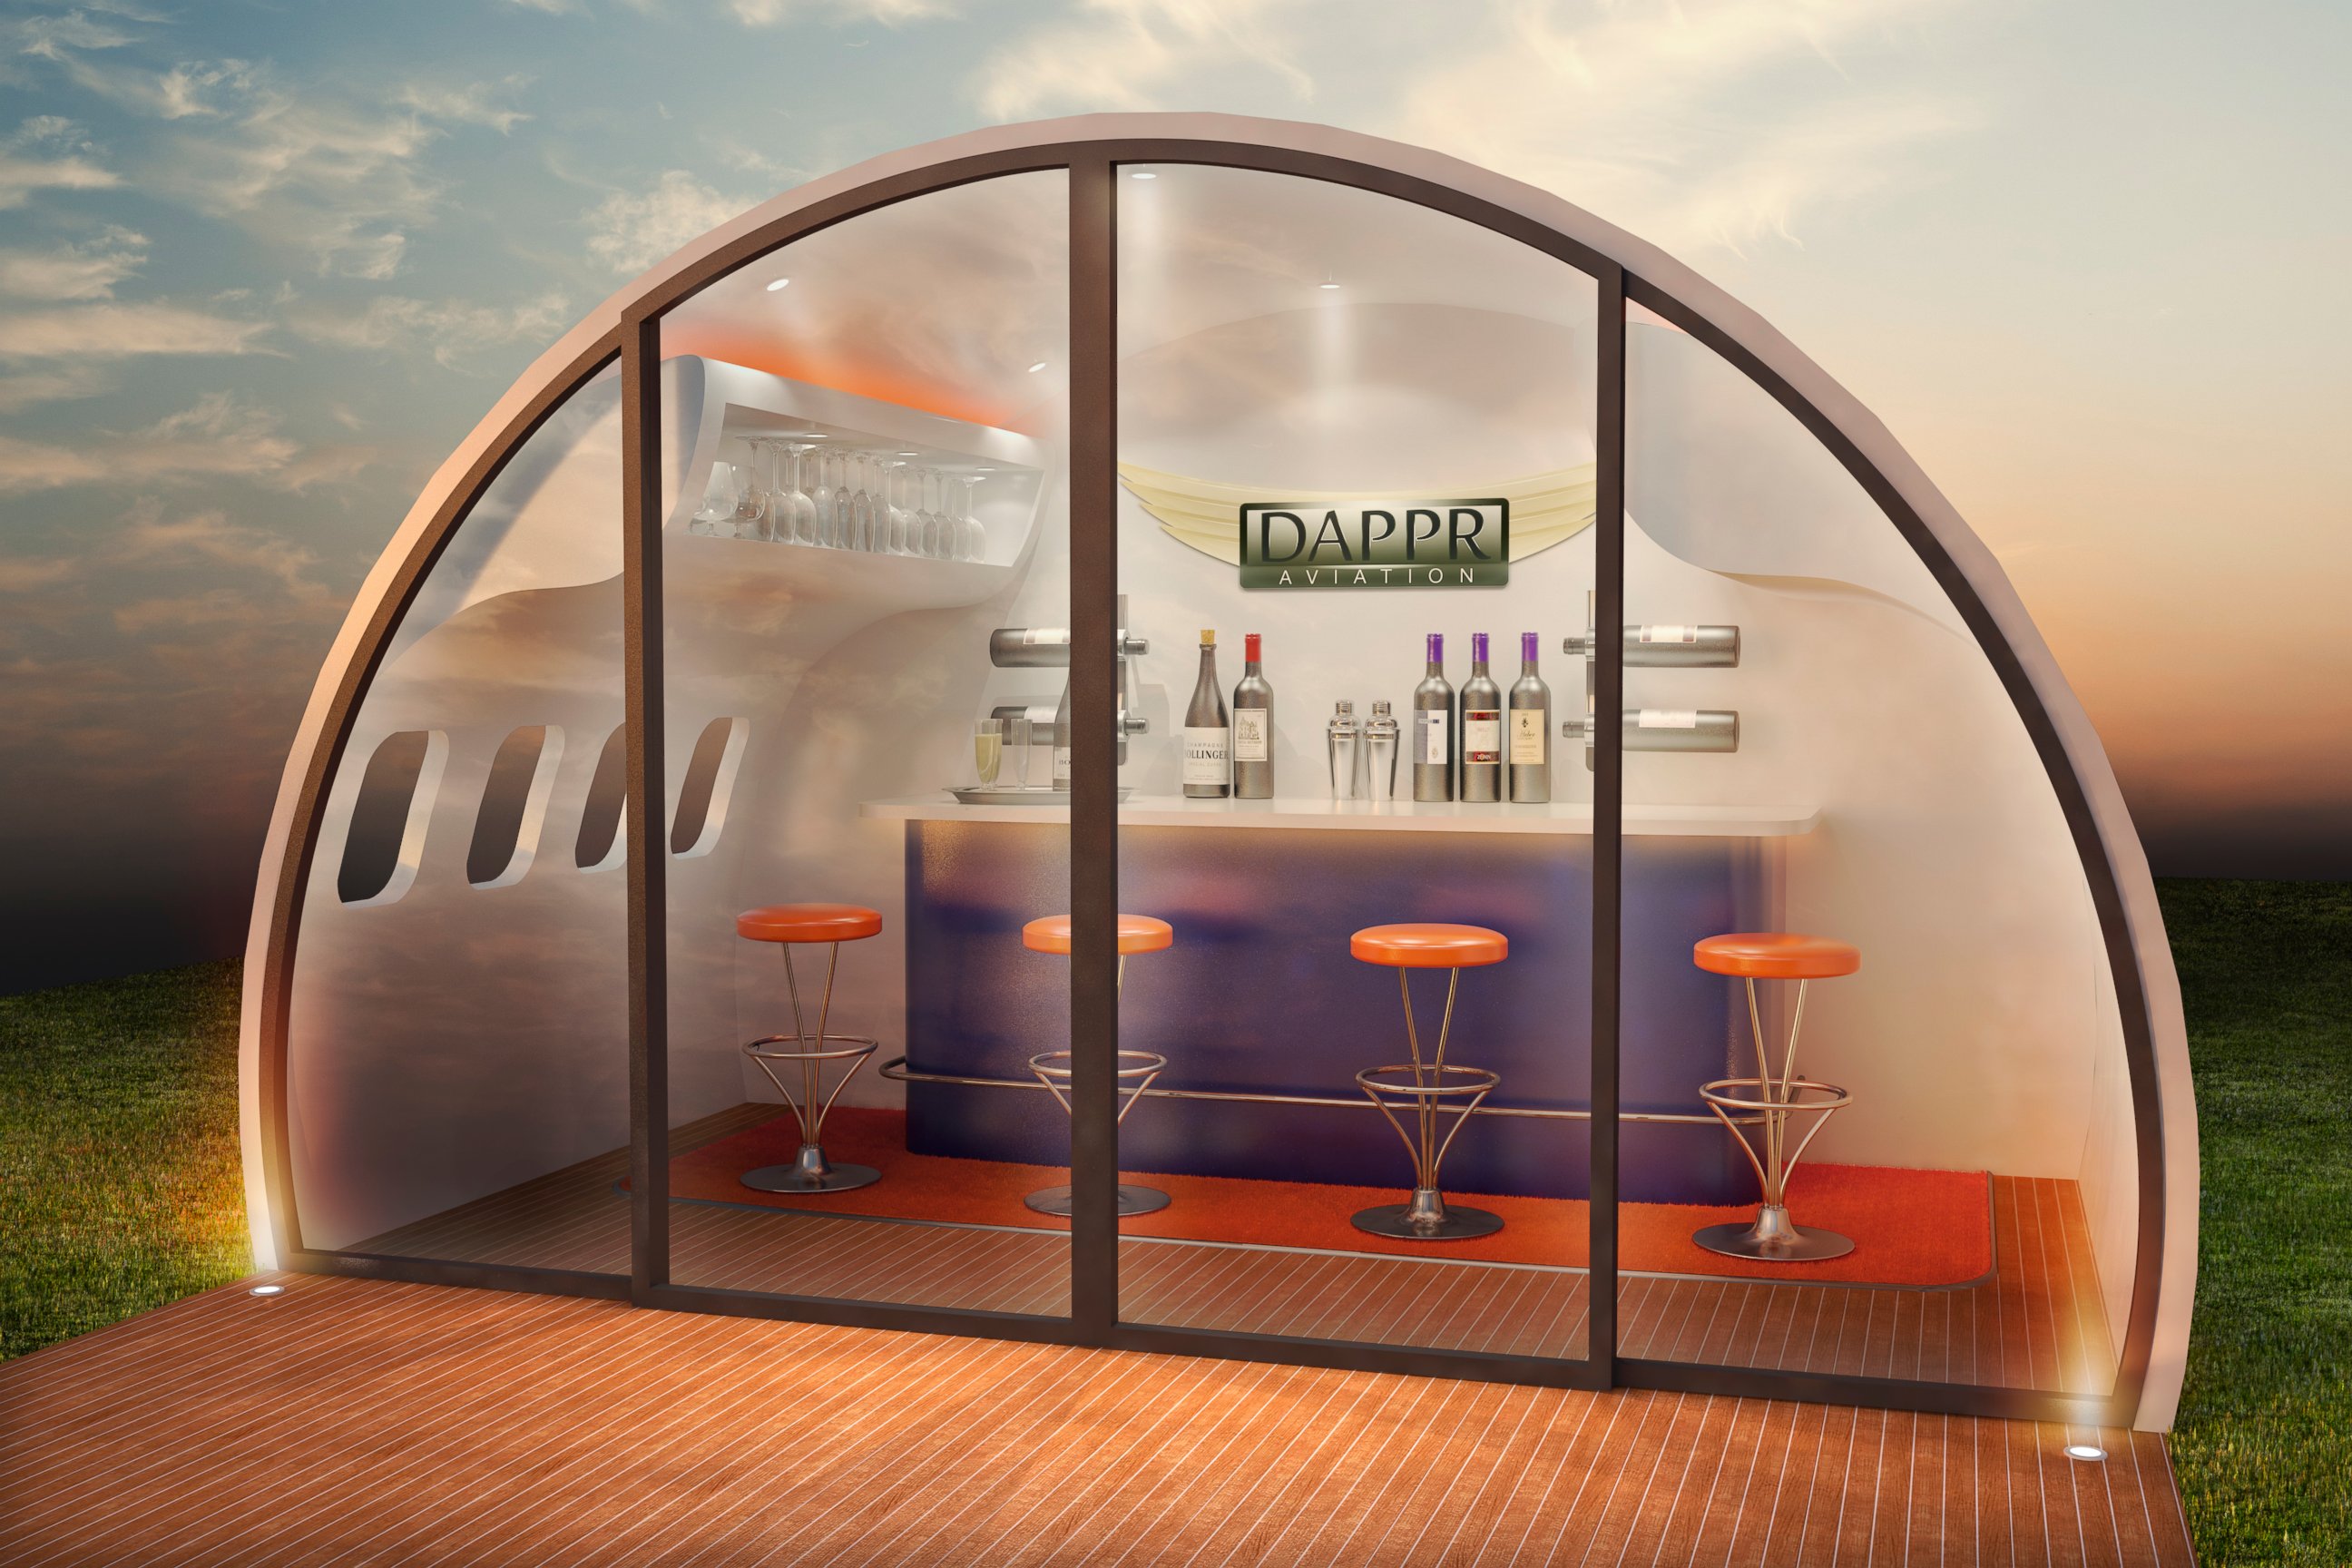 PHOTO: DappR's Aeropods are made from repurposed Airbus A320 airliners. 